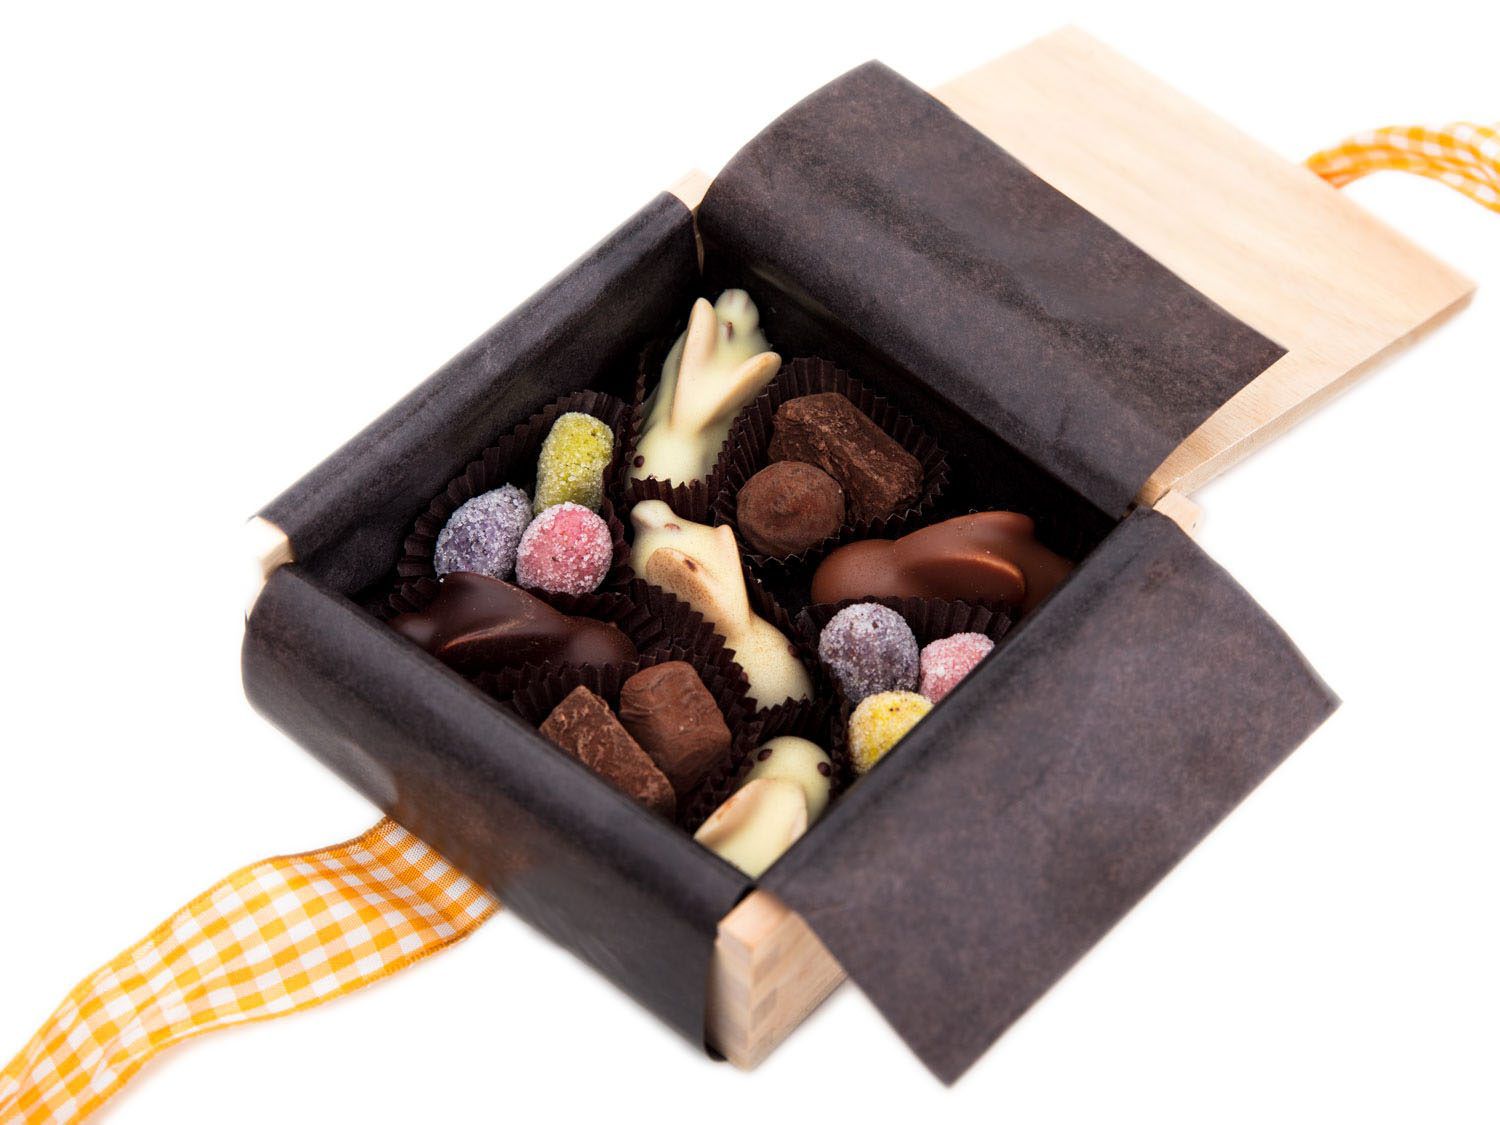 A gift box of assorted Easter chocolates from L.A. Burdick